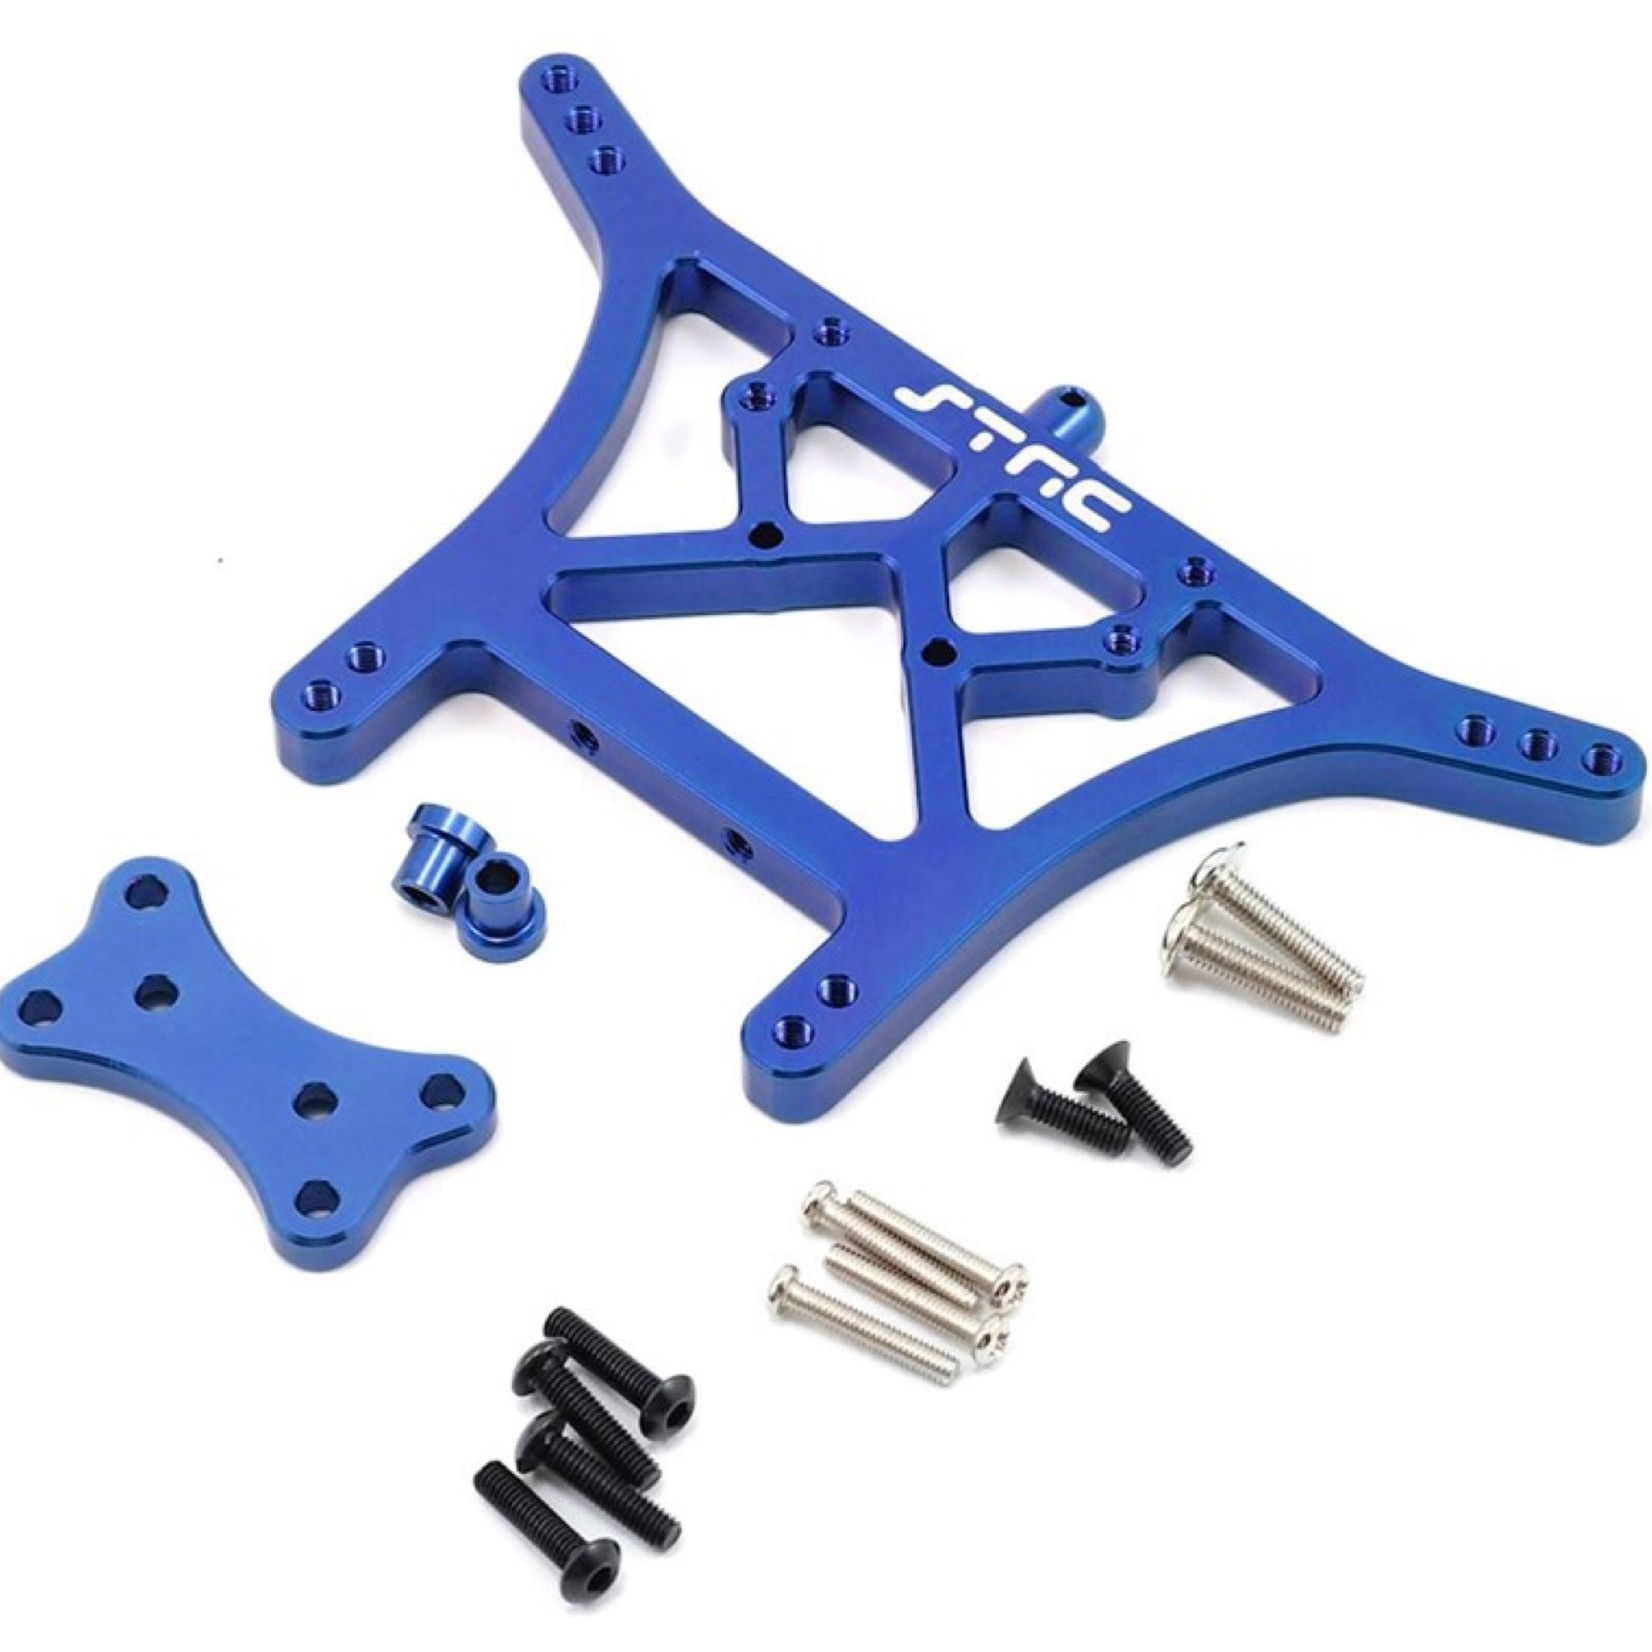 ST Racing Concepts ST Racing Concepts 6mm Heavy Duty Rear Shock Tower (Blue) #ST3638B